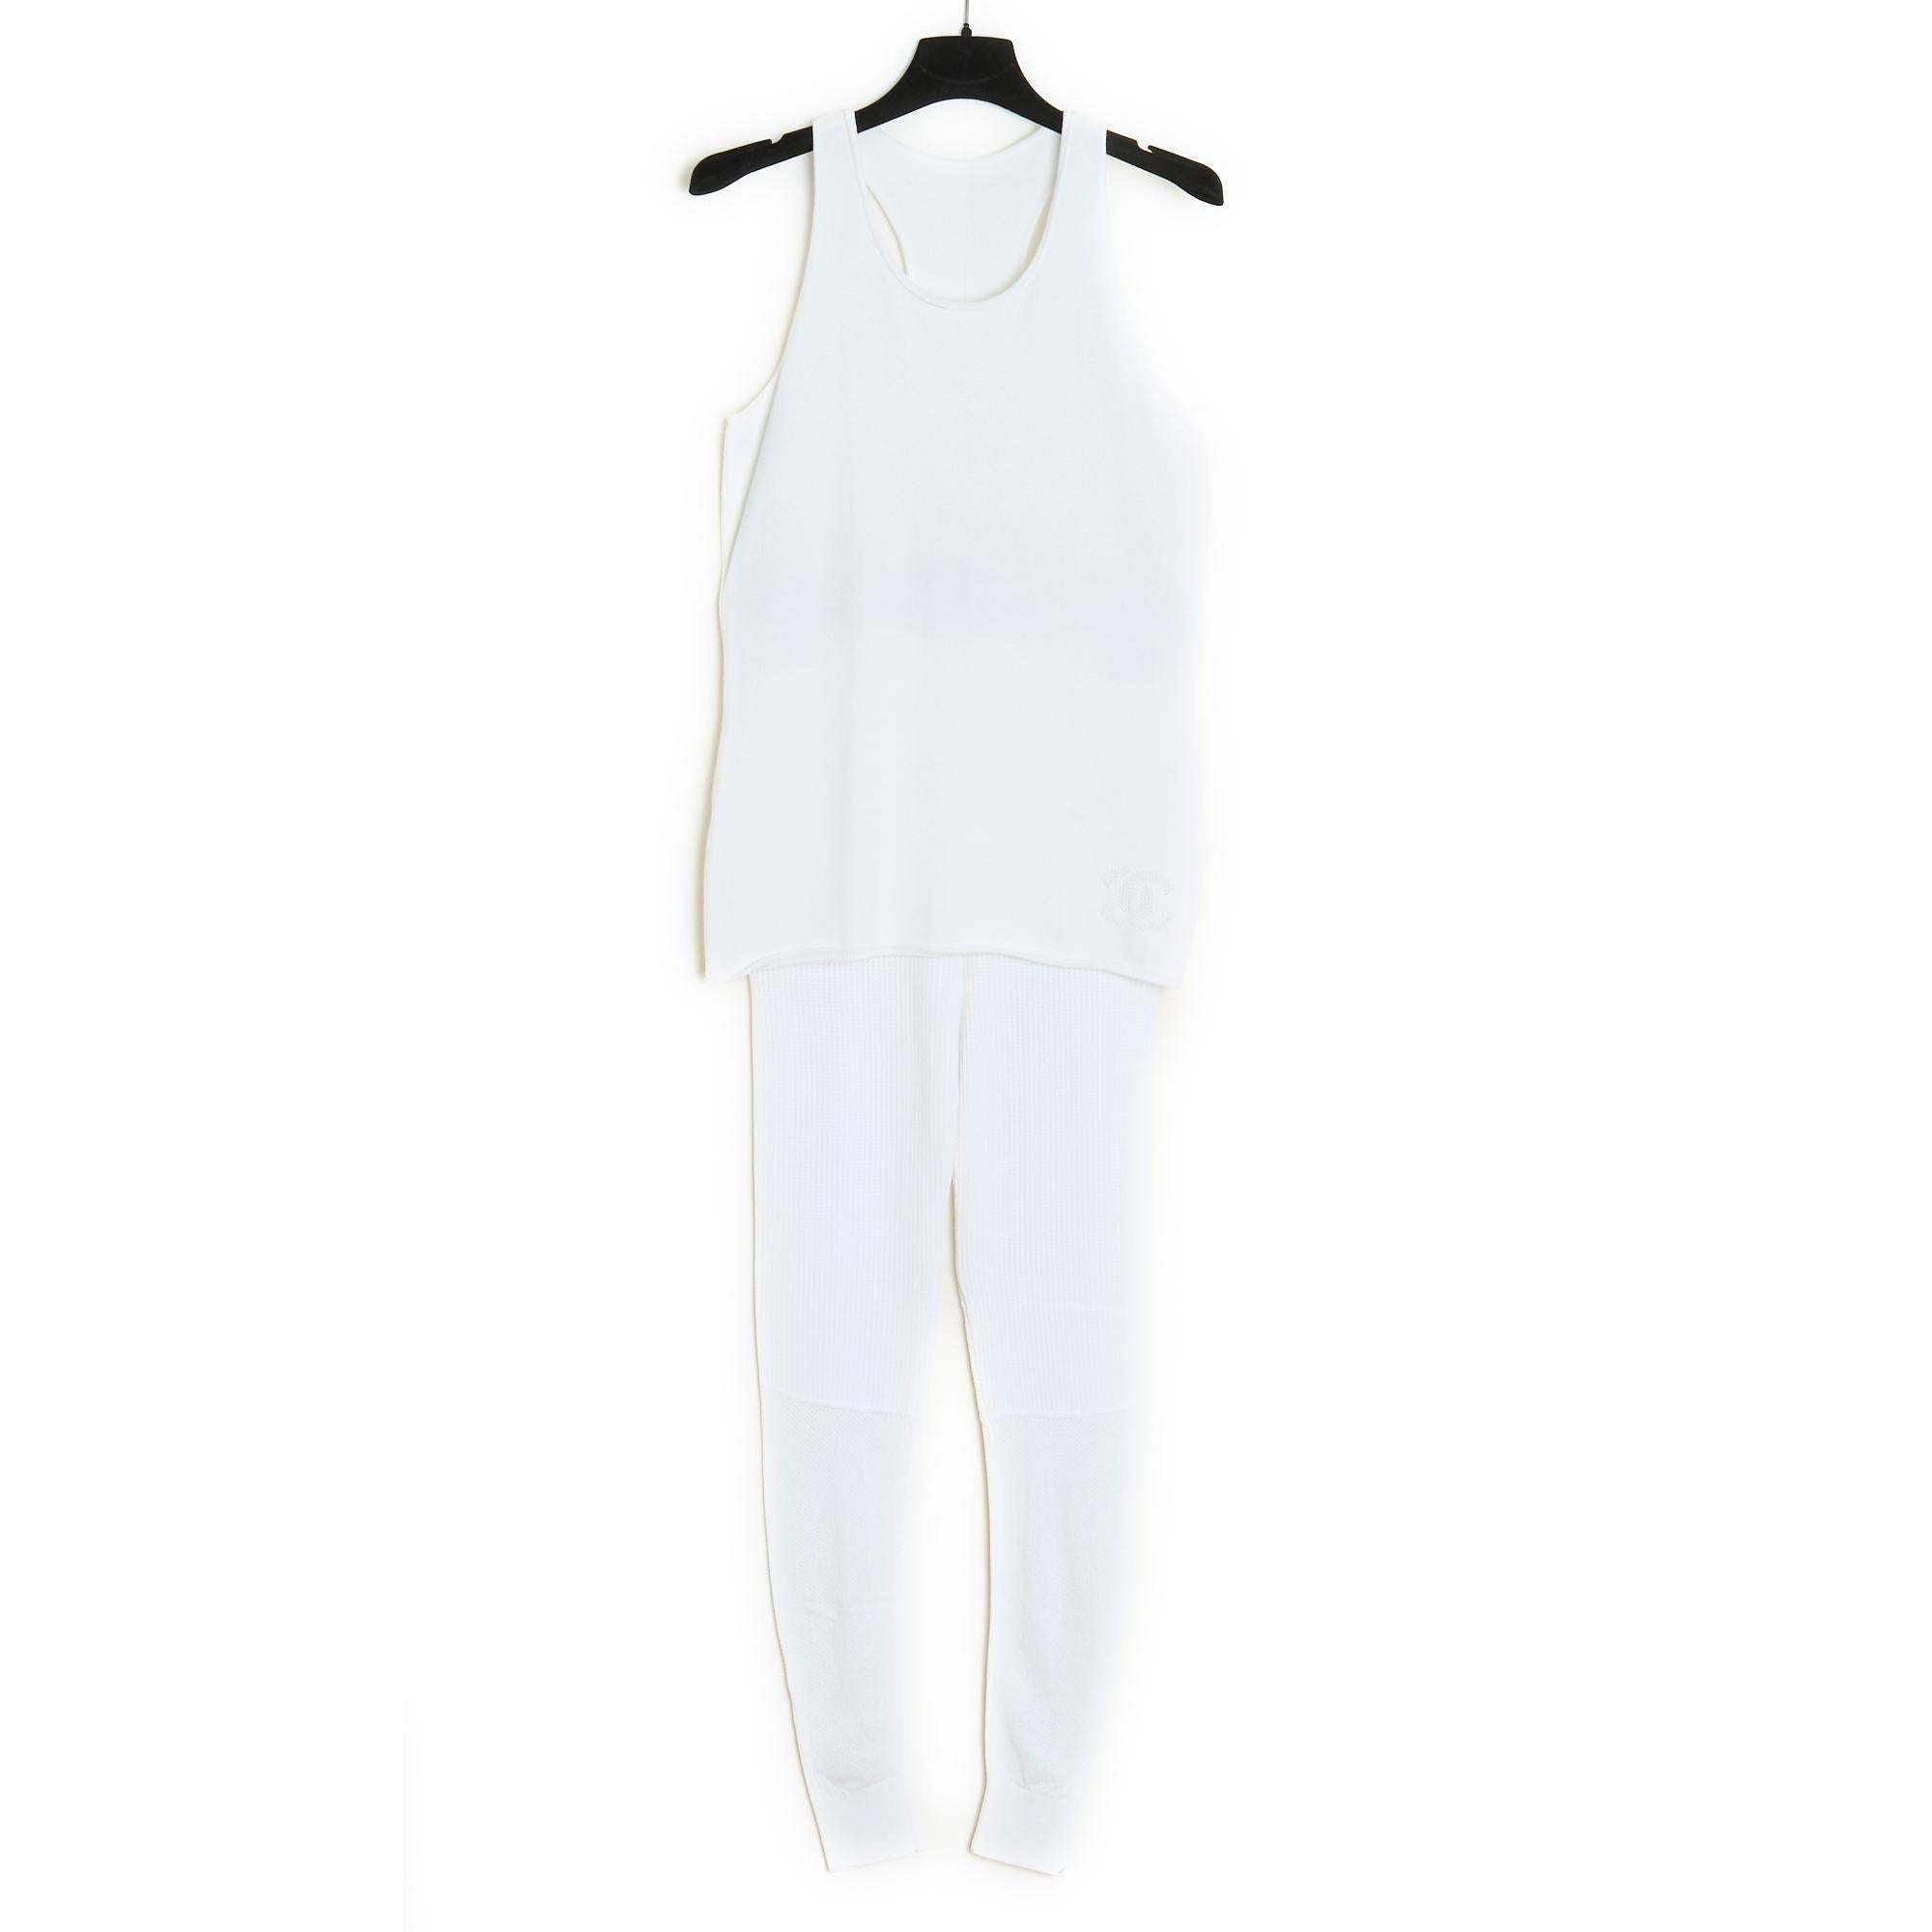 Chanel set probably Sport in white cotton blend knit composed of a tank top with American armholes, straight cut (fairly loose), CC logo knitted at the bottom left (right in the photos) of the top, and leggings different weaves with support bands or